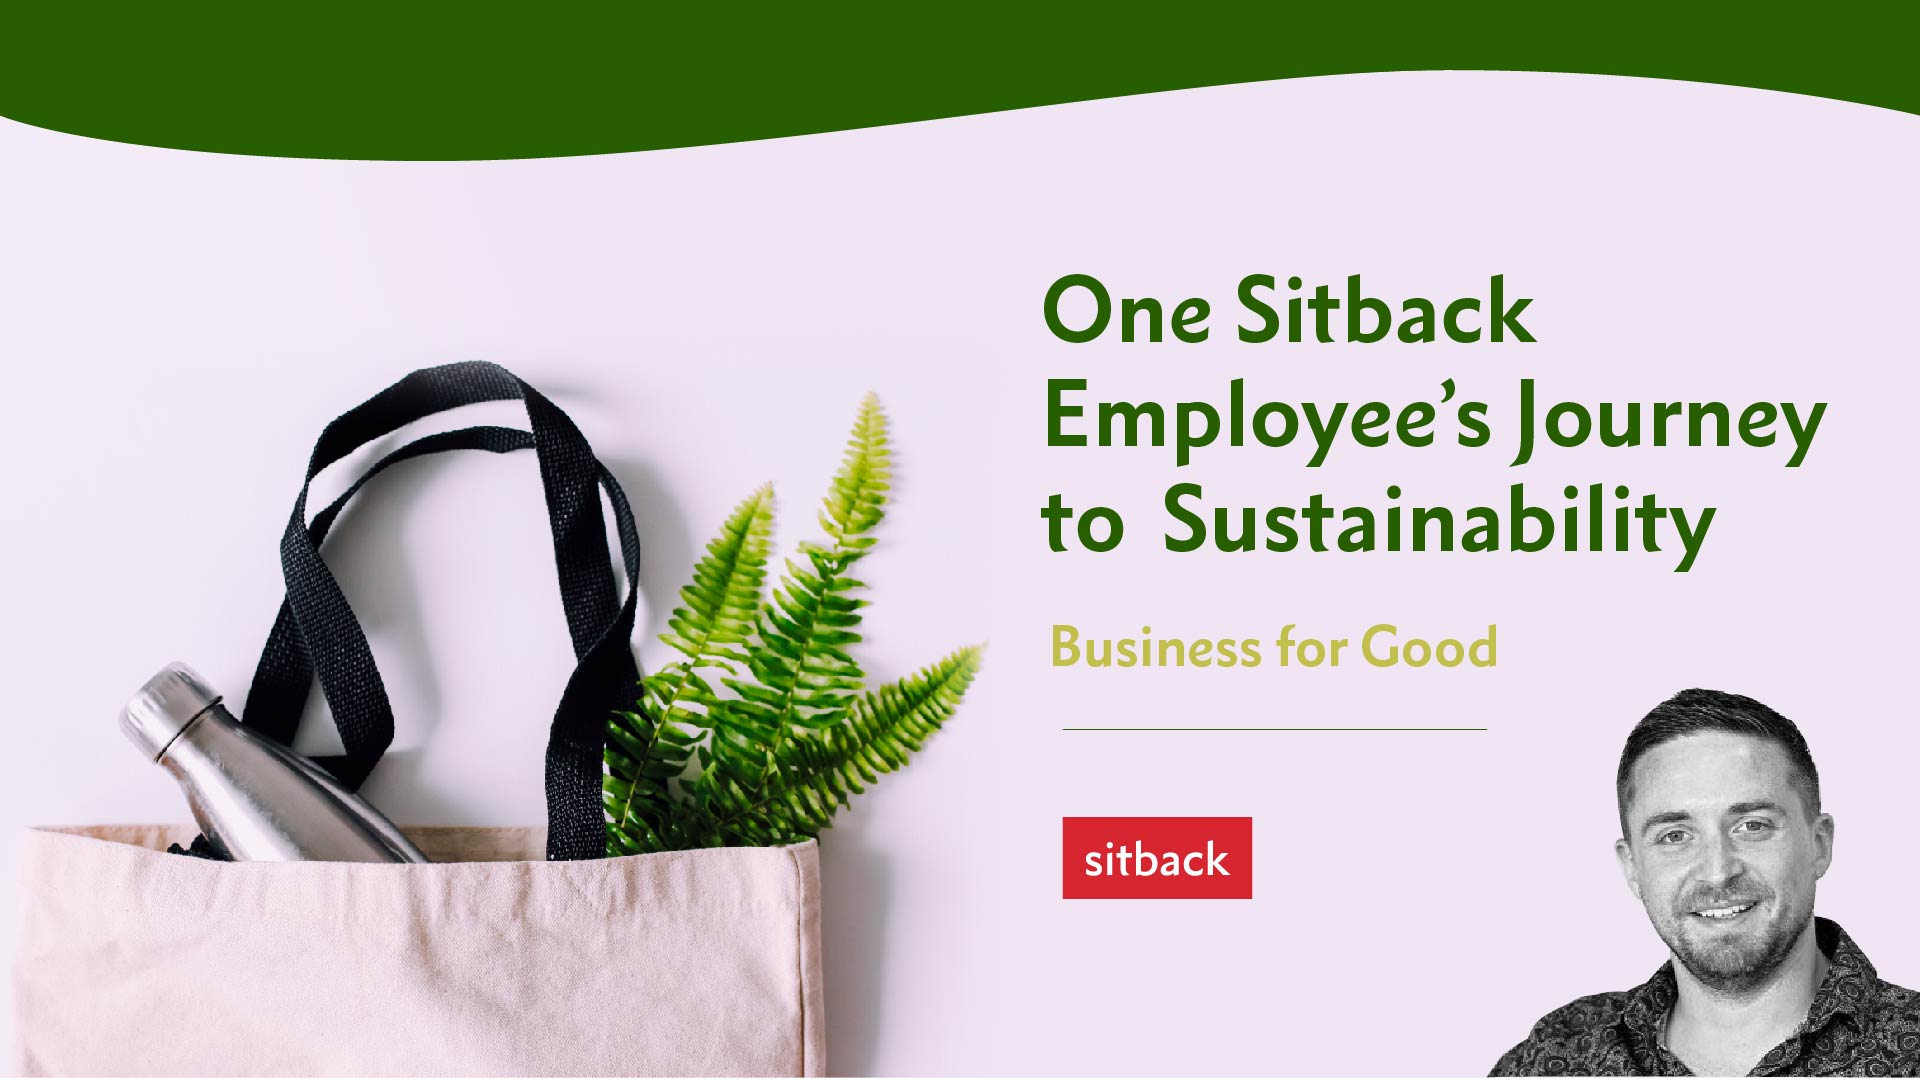 Business for Good: One Sitback Employee’s Journey to Sustainability